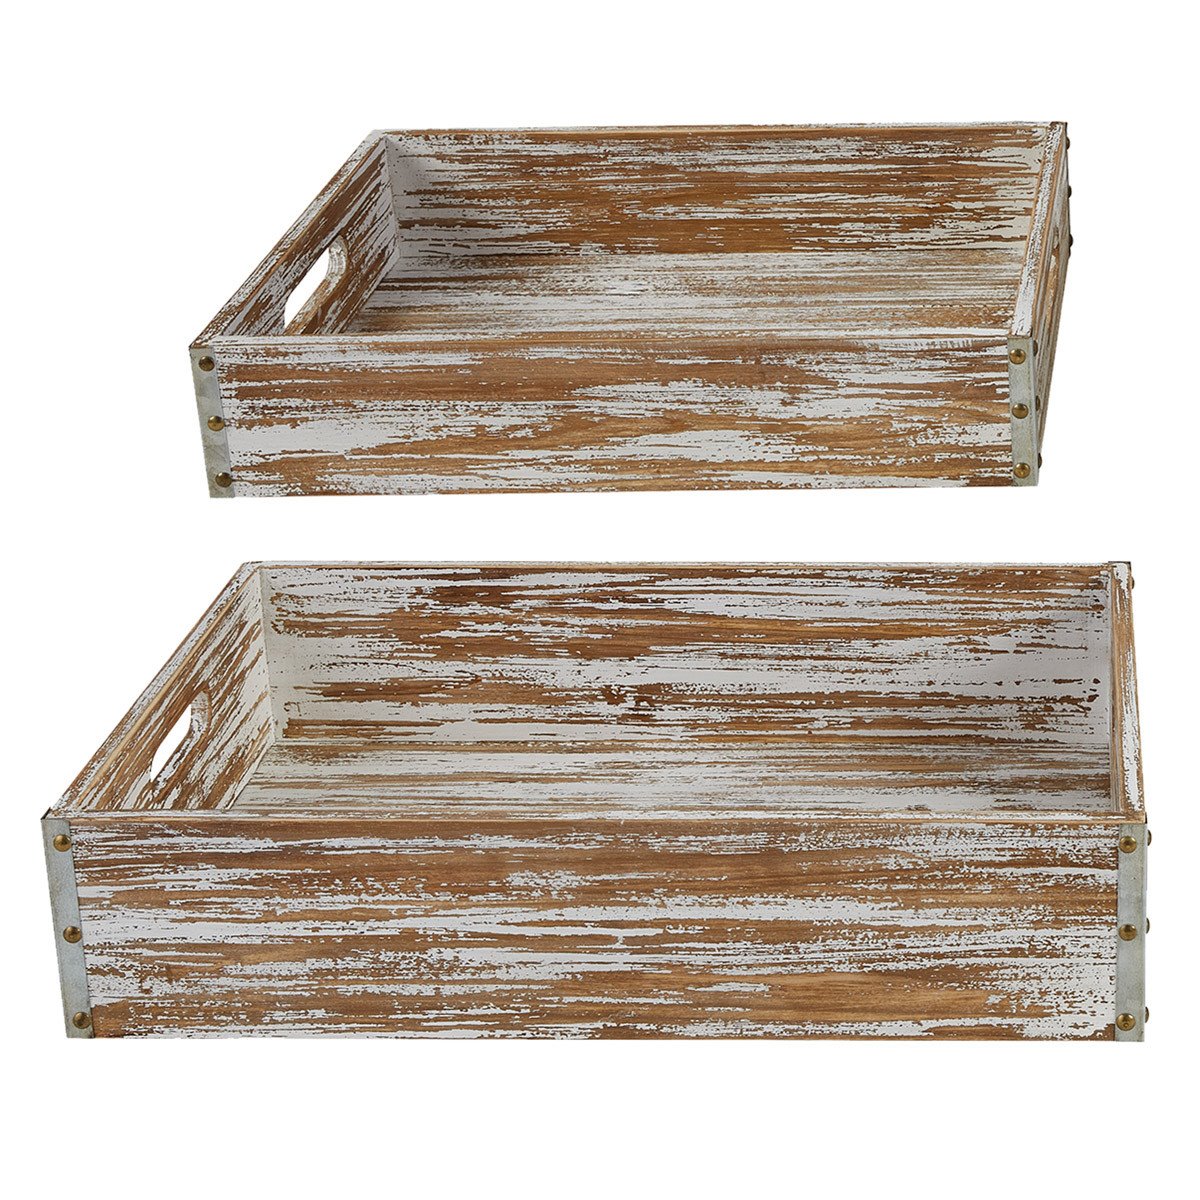 Distressed Wood Table Crates - Set of Two